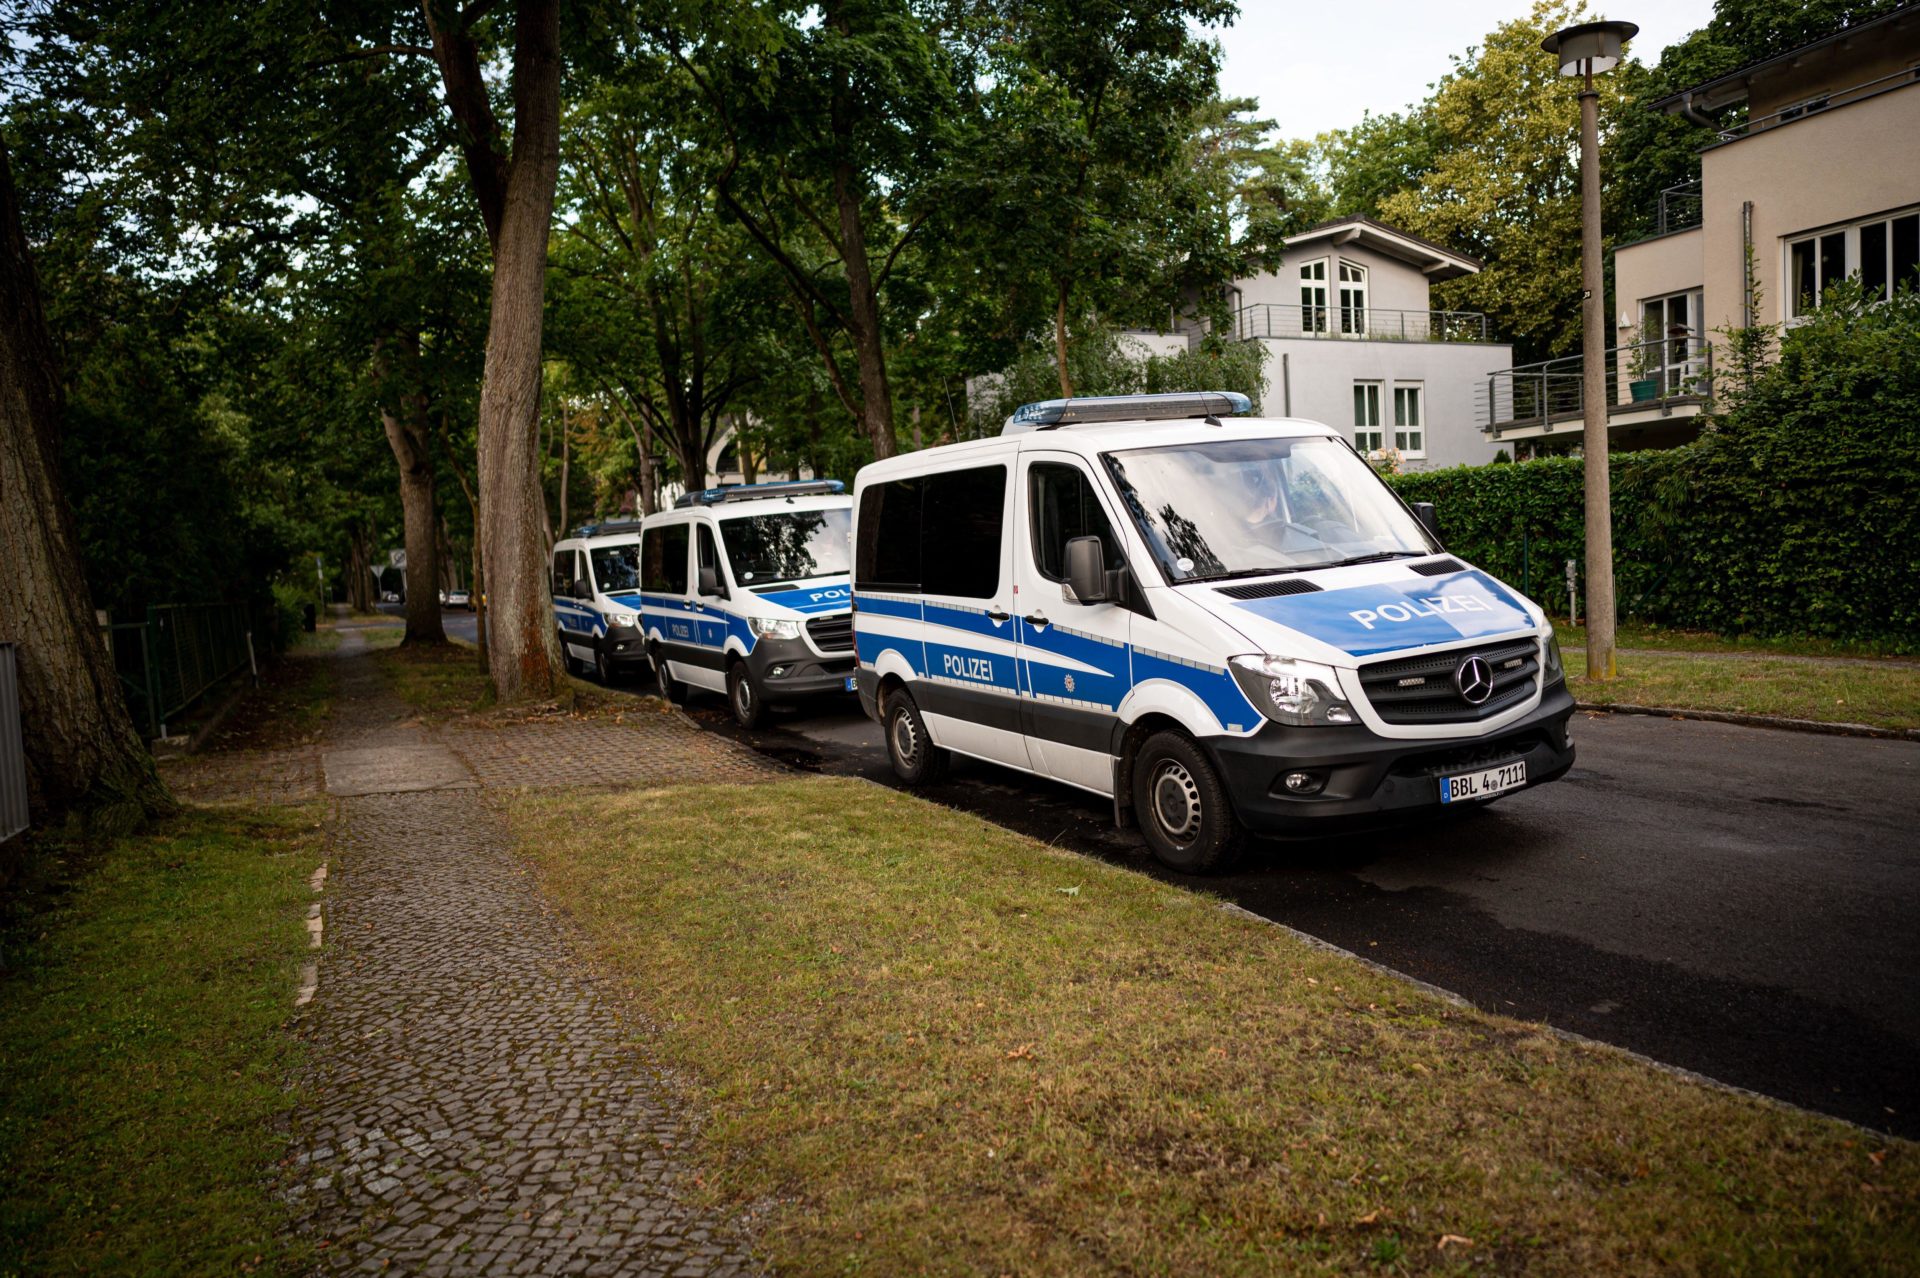 Police cars are parked in a residential area in Berlin, Germany during the search for wild animal believed to be a lioness. 